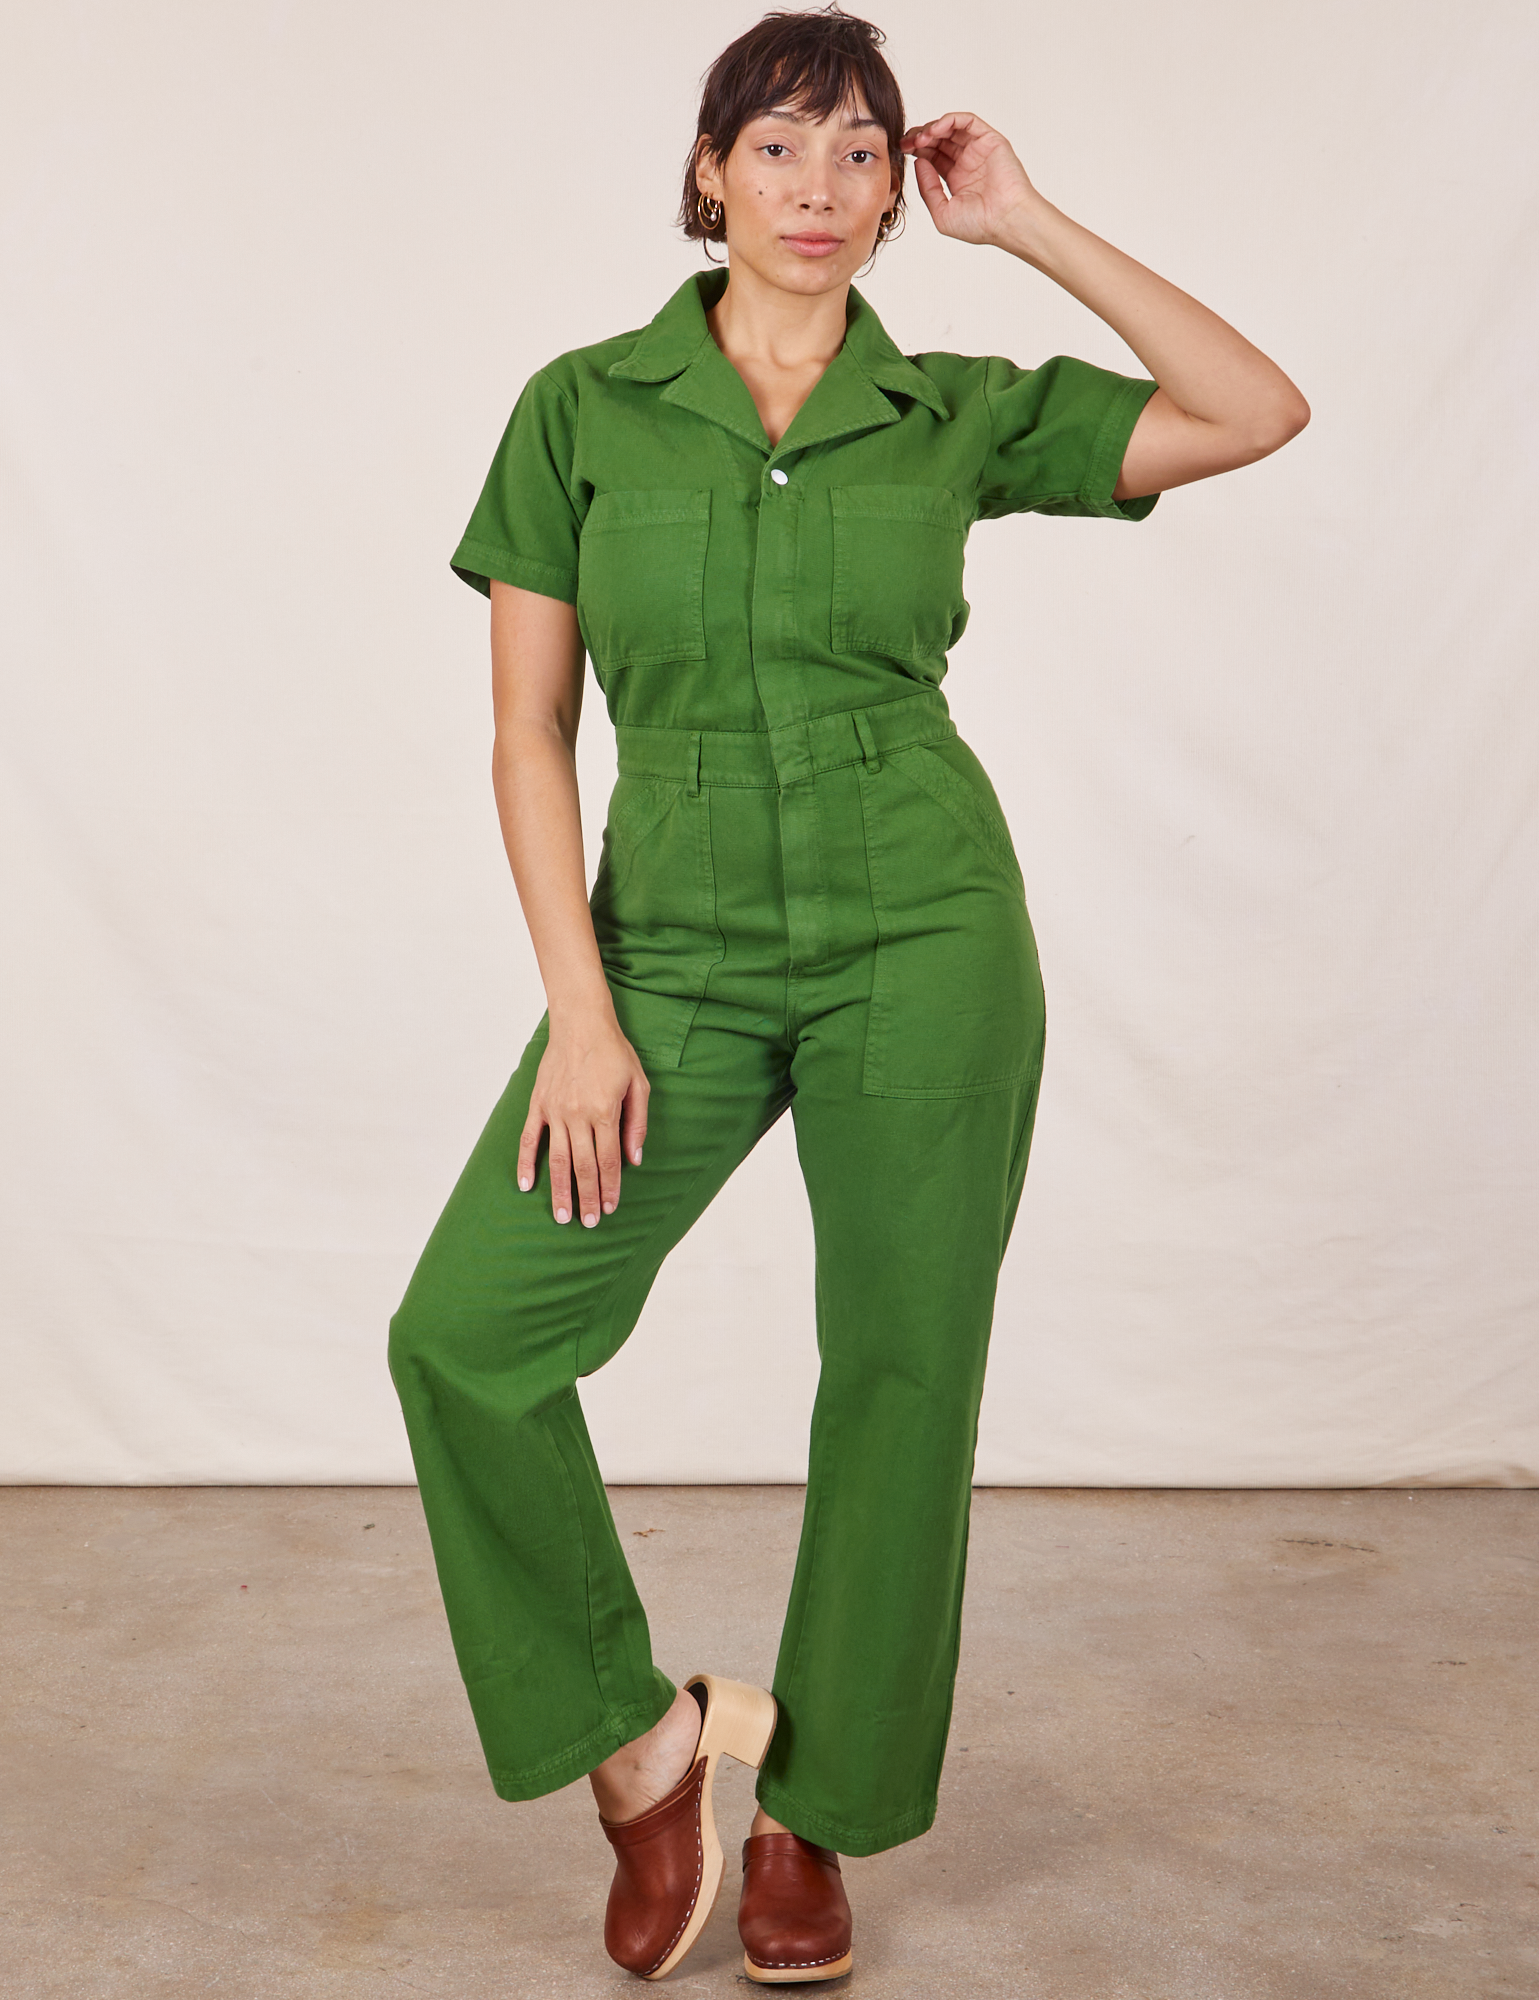 Tiara is 5&#39;4&quot; and wearing S Short Sleeve Jumpsuit in Lawn Green